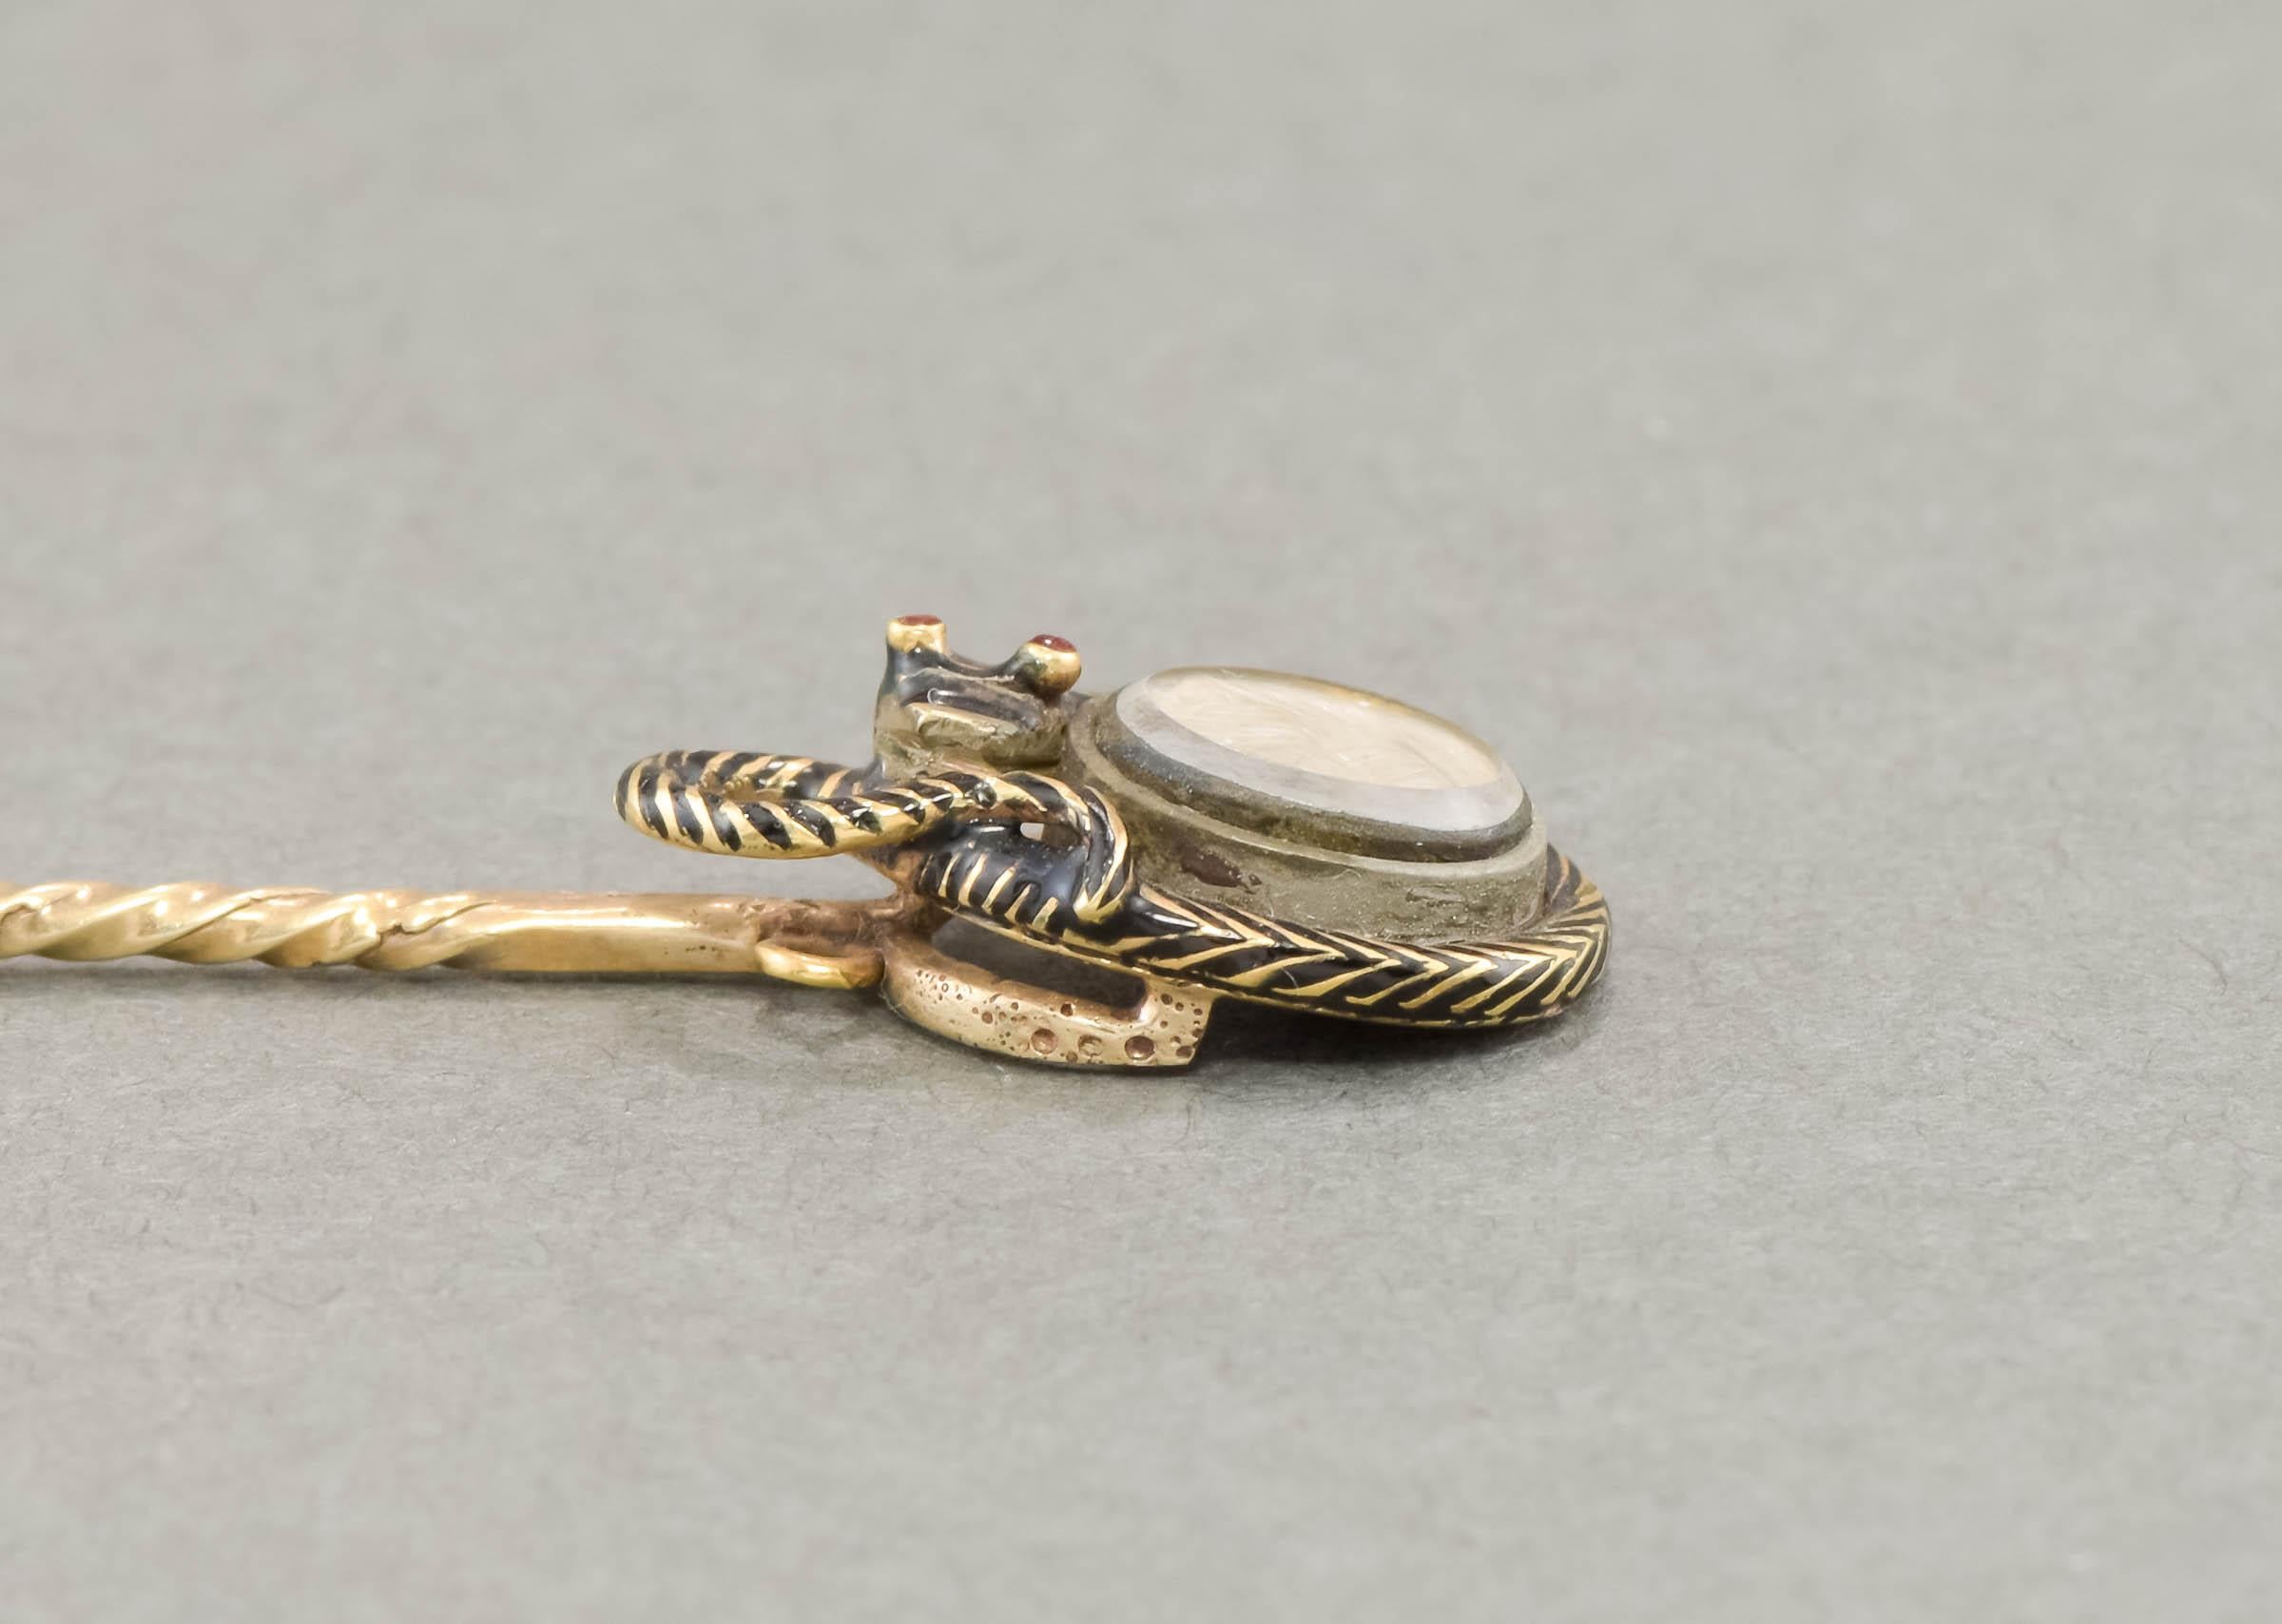 Antique Enamel Snake Mourning Stick Pin with Hair Locket, Inscribed 1852 For Sale 3